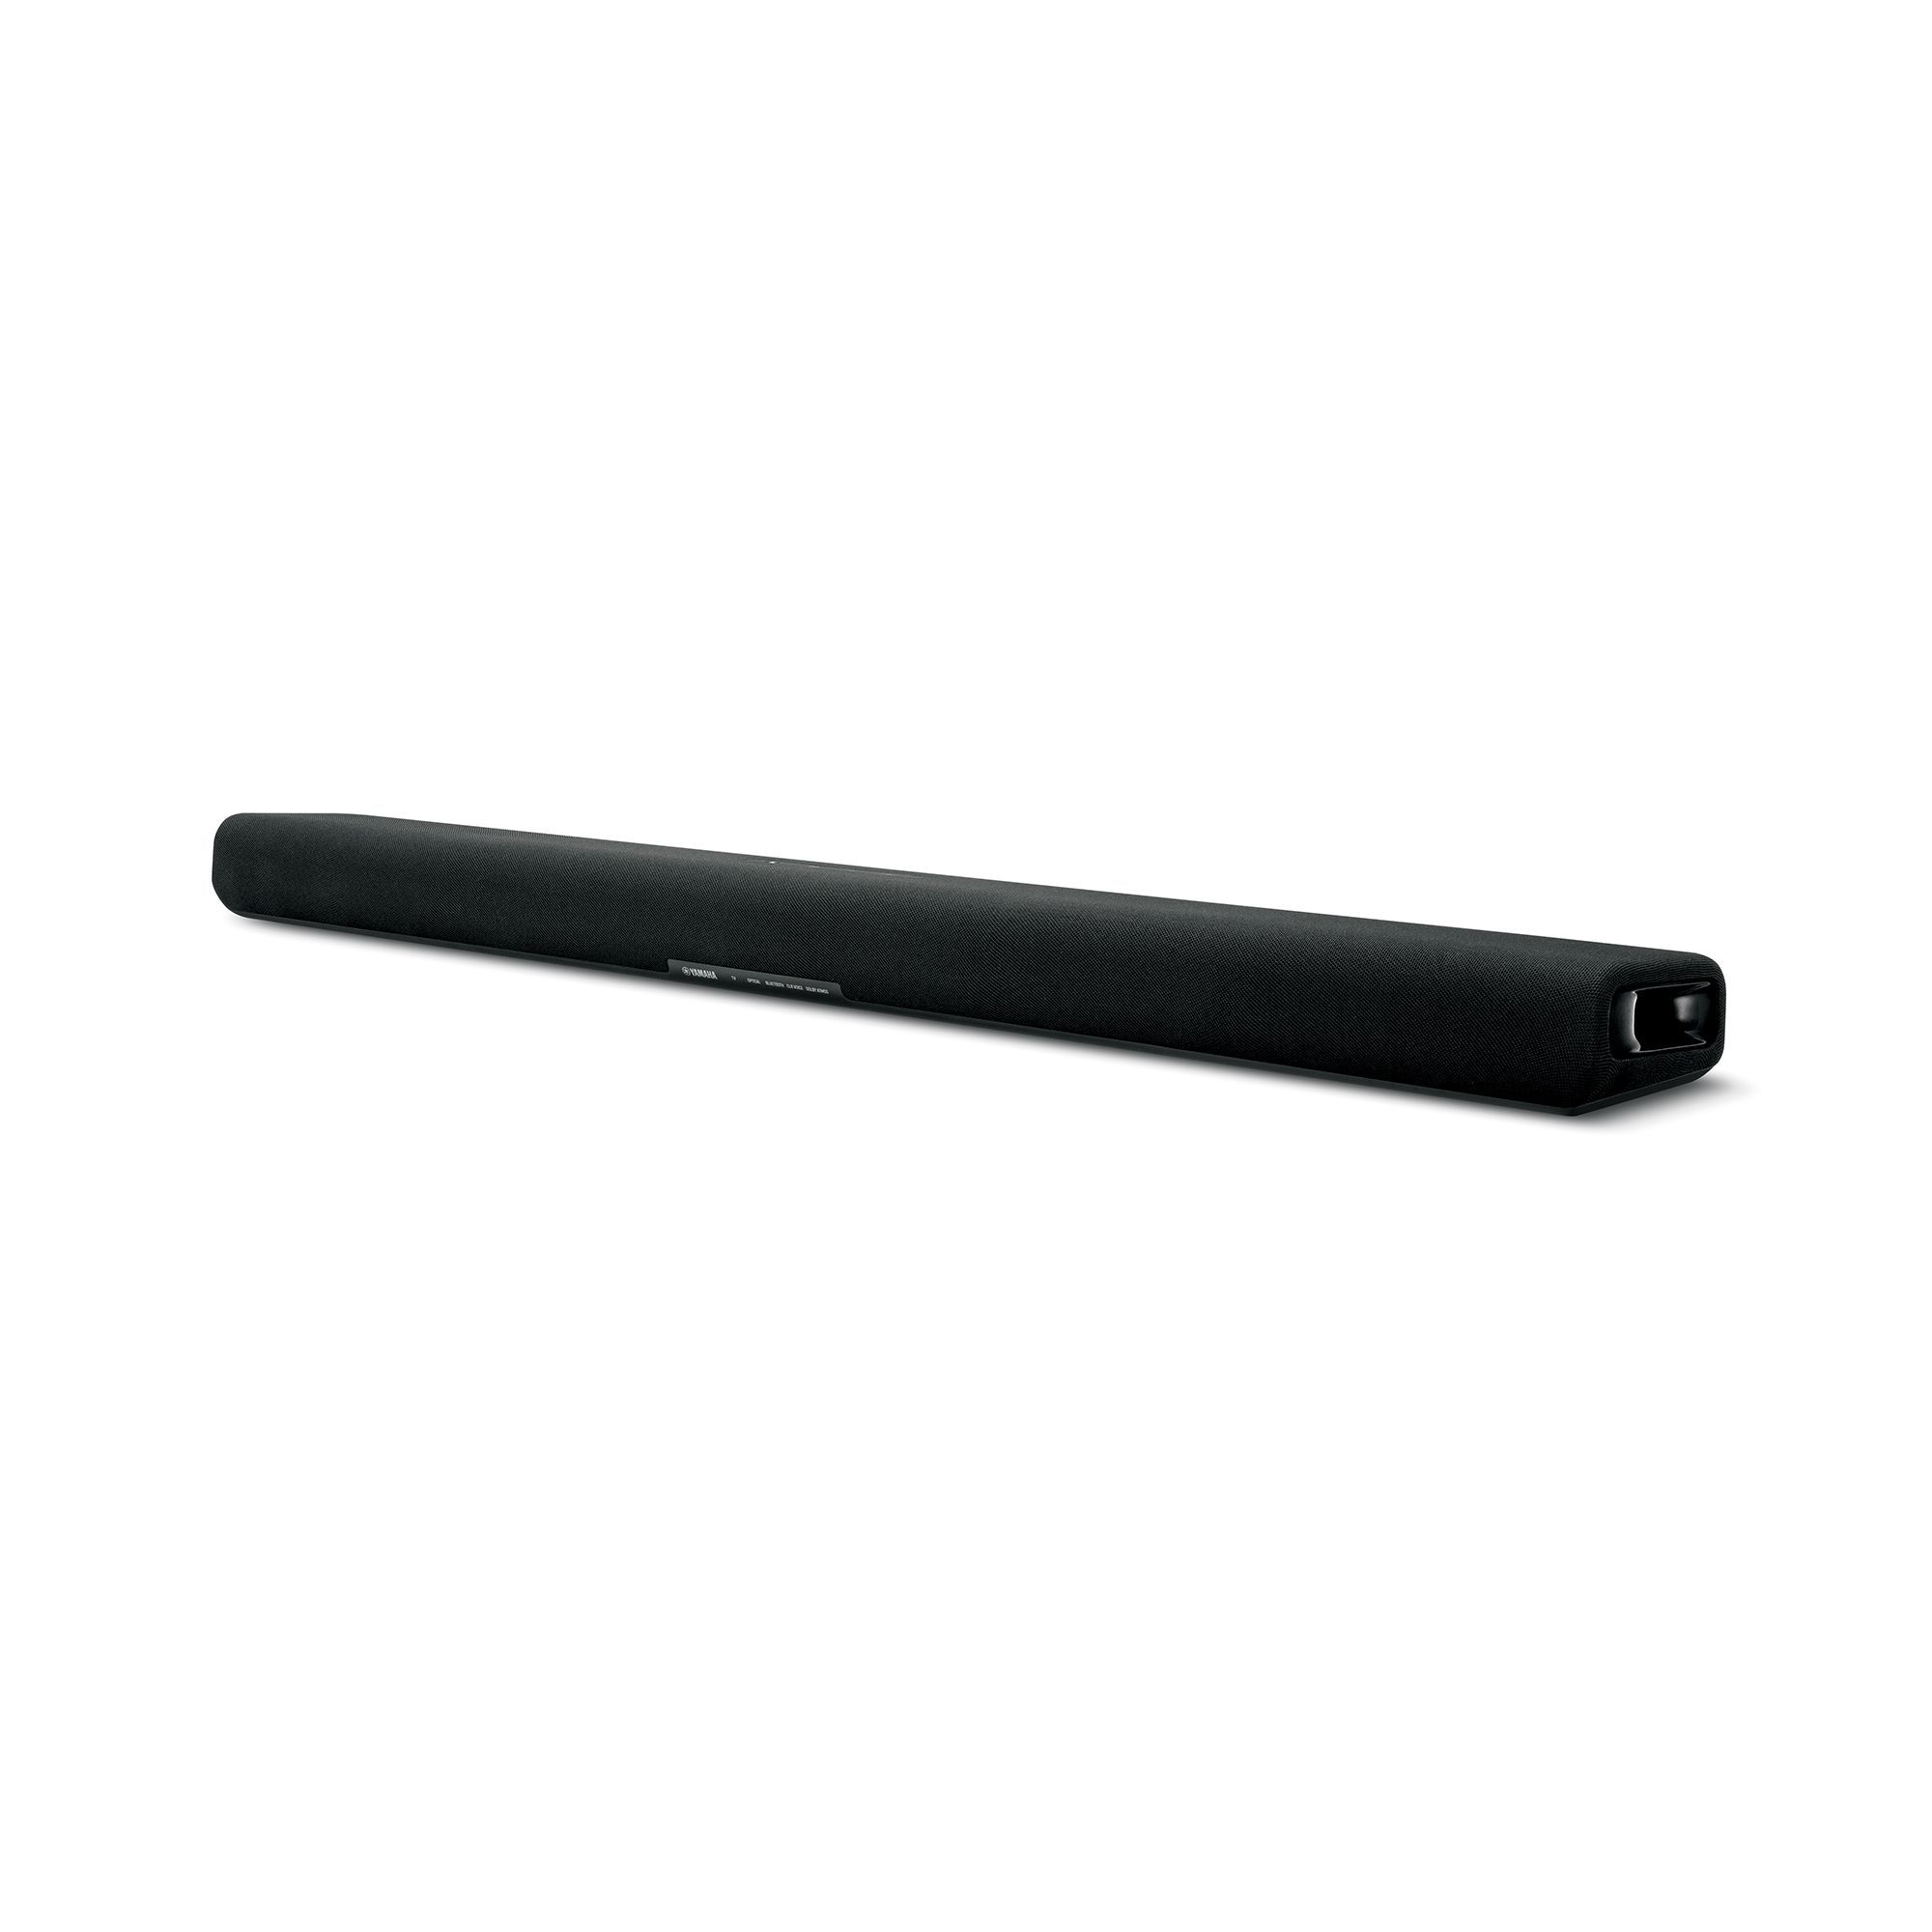 Yamaha SR-B30A Dolby Atoms Sound Bar with Built-In Subwoofers